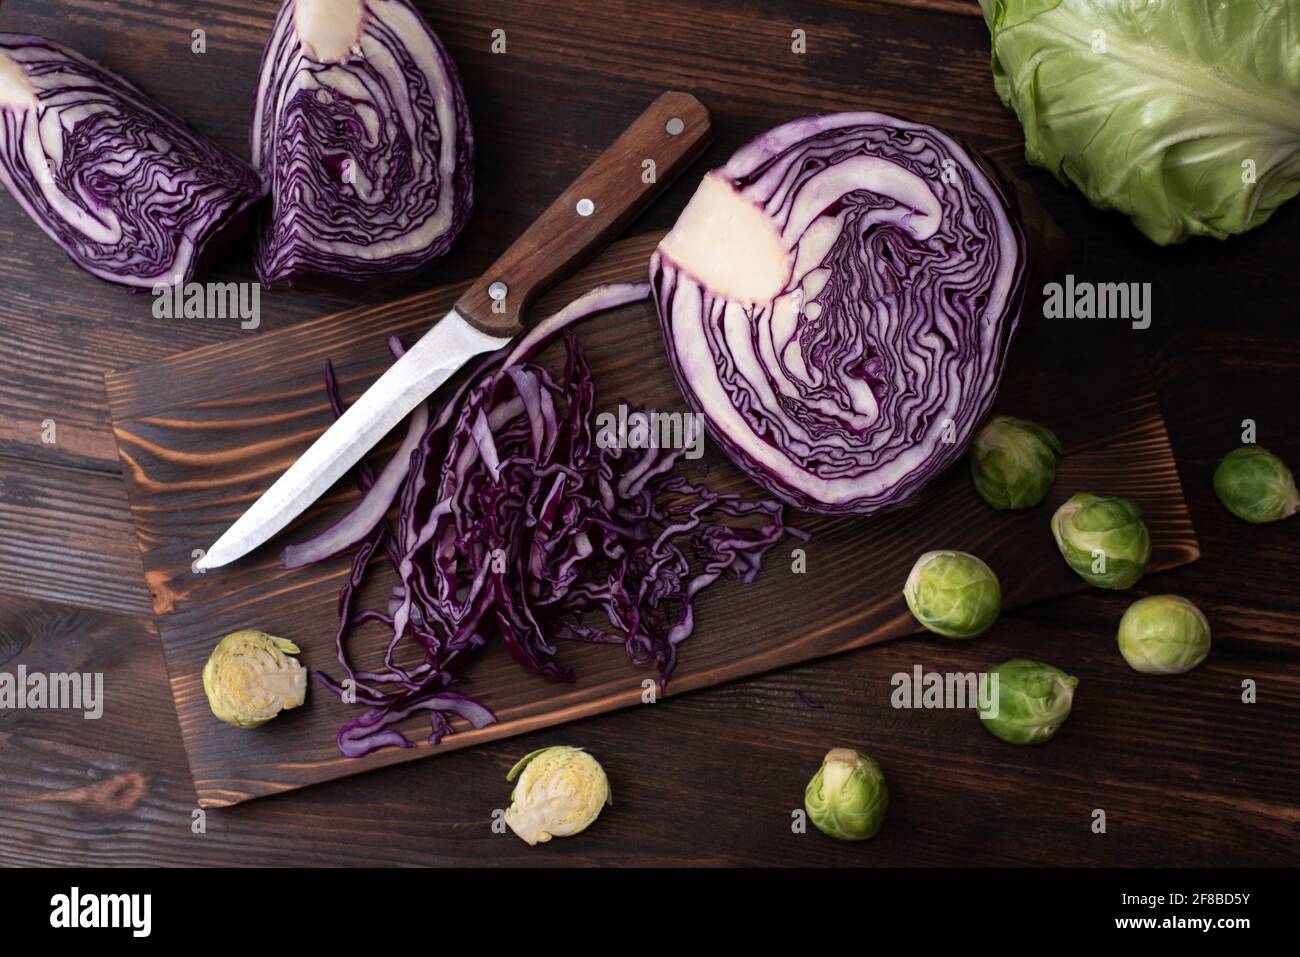 Chopped red cabbage on a cutting board on a wooden dark background with early cabbage head, brussels sprouts, rustic style, close up. Stock Photo